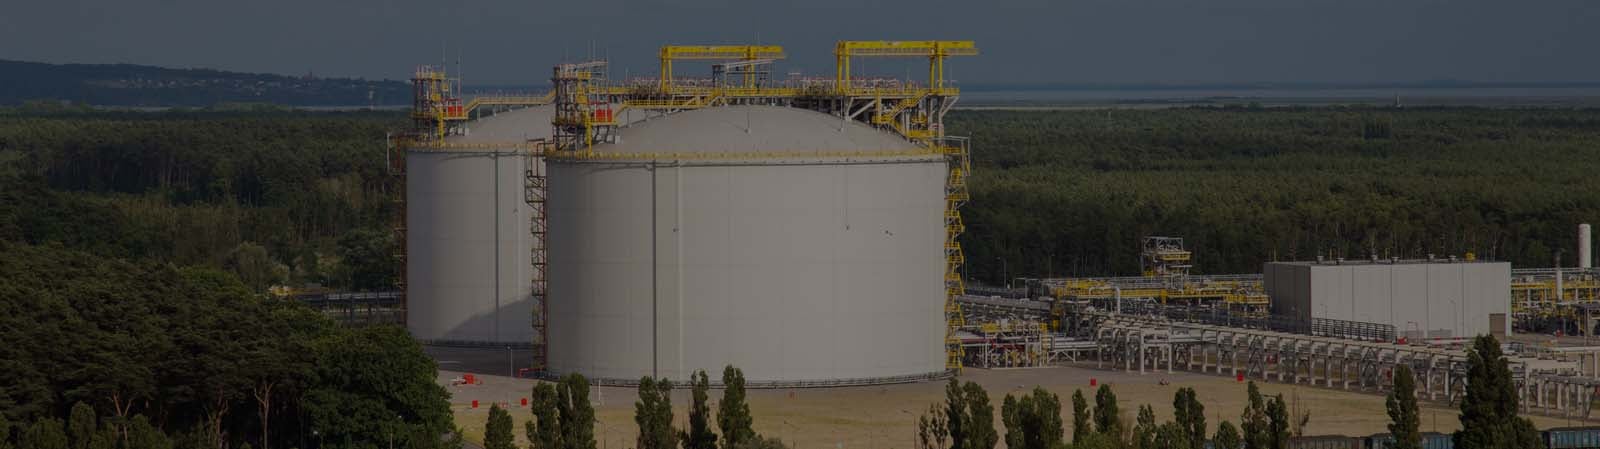 gas industry solutions, lng cng industry solutions, Gas tank surrounded by forest